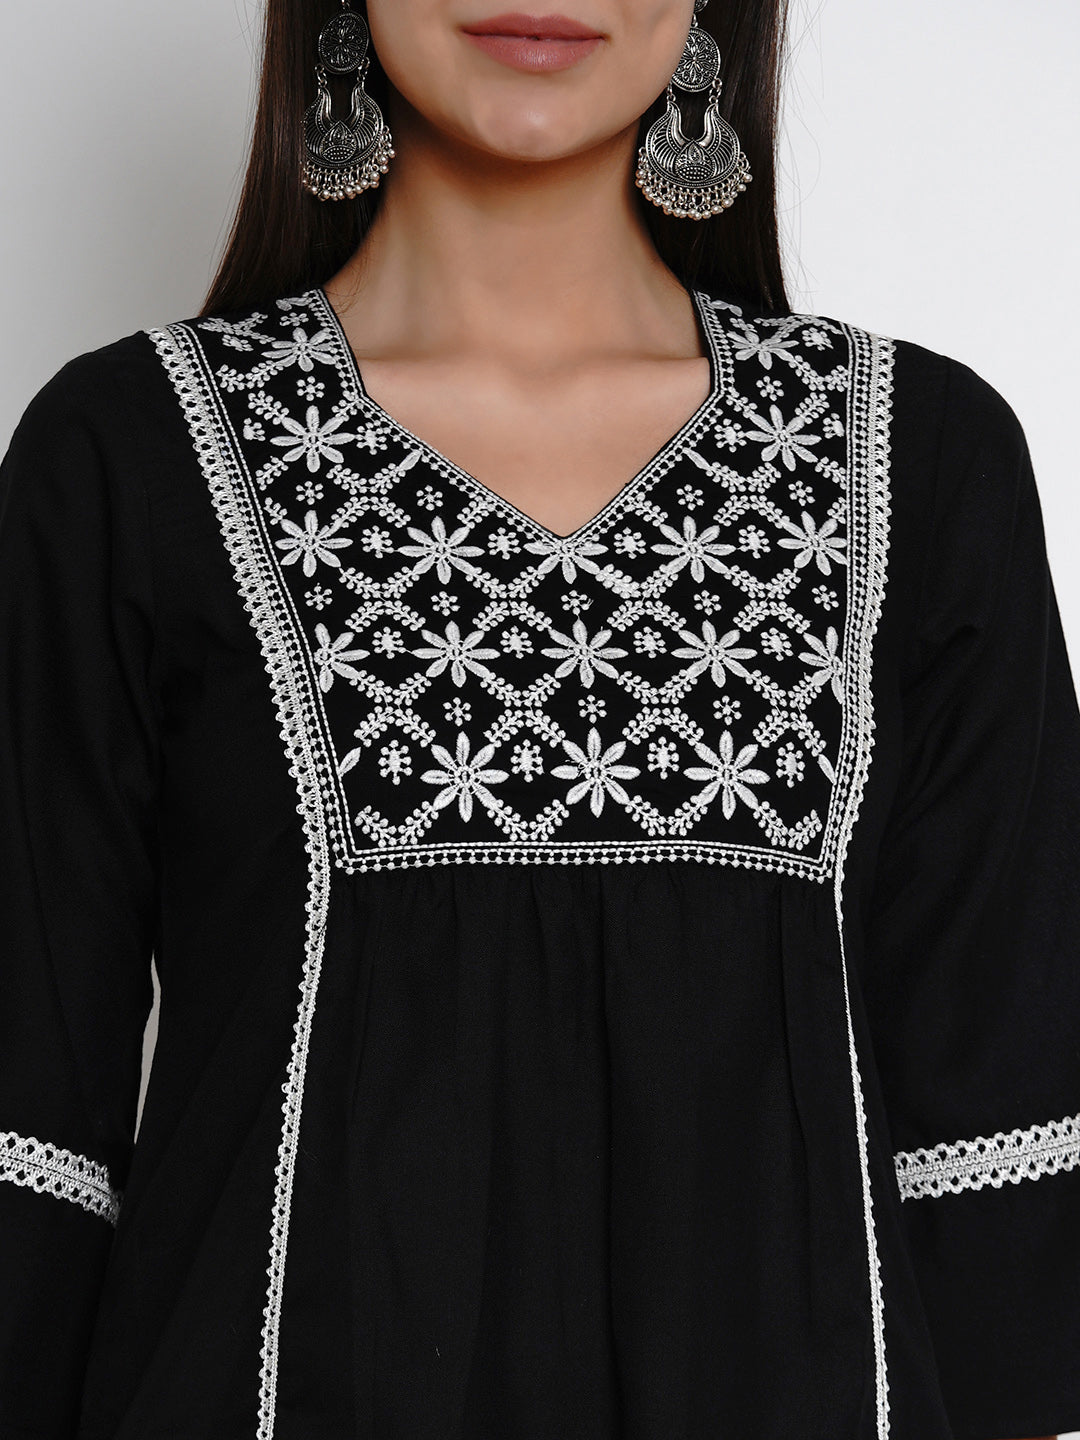 Women's Black Embroidered Kurta With Palazzos - Bhama Couture